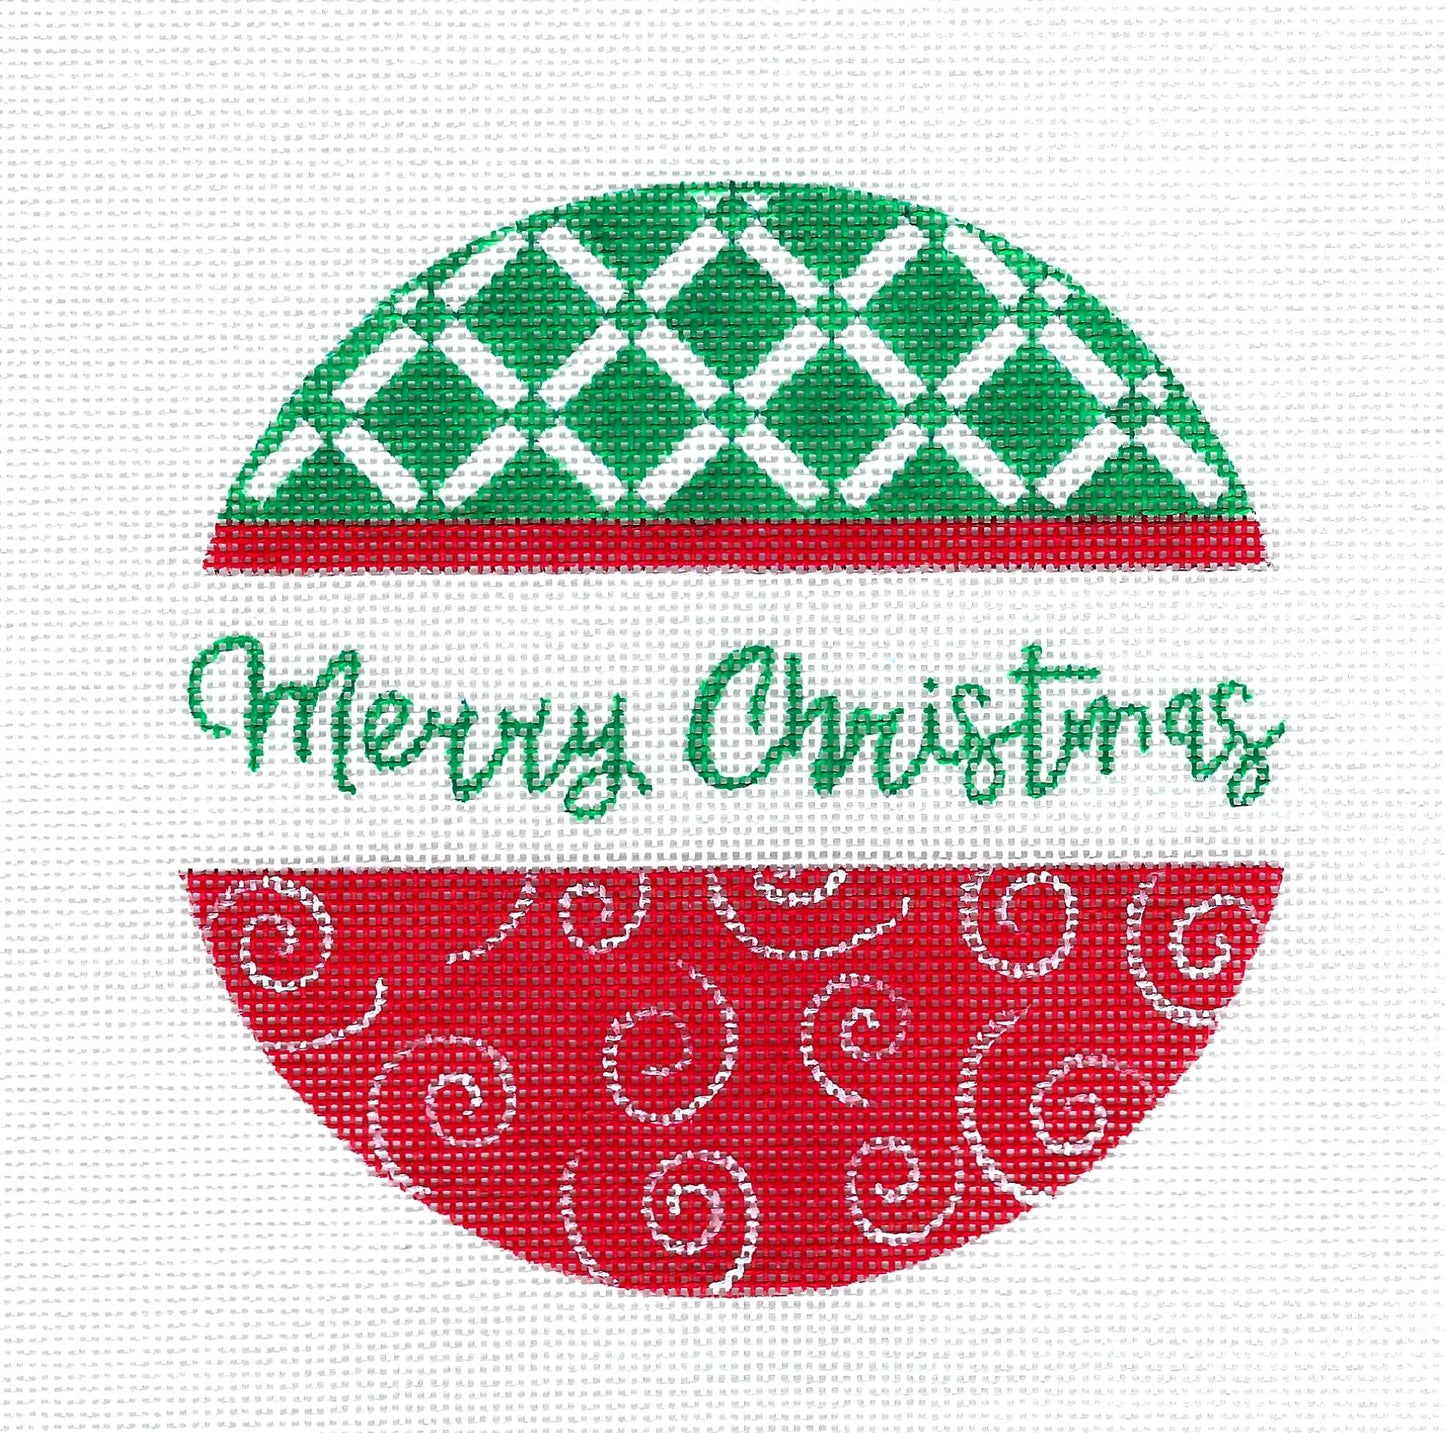 Christmas Round ~ MERRY CHRISTMAS handpainted 5" ROUND Needlepoint Canvas by Pink Petals from CBK